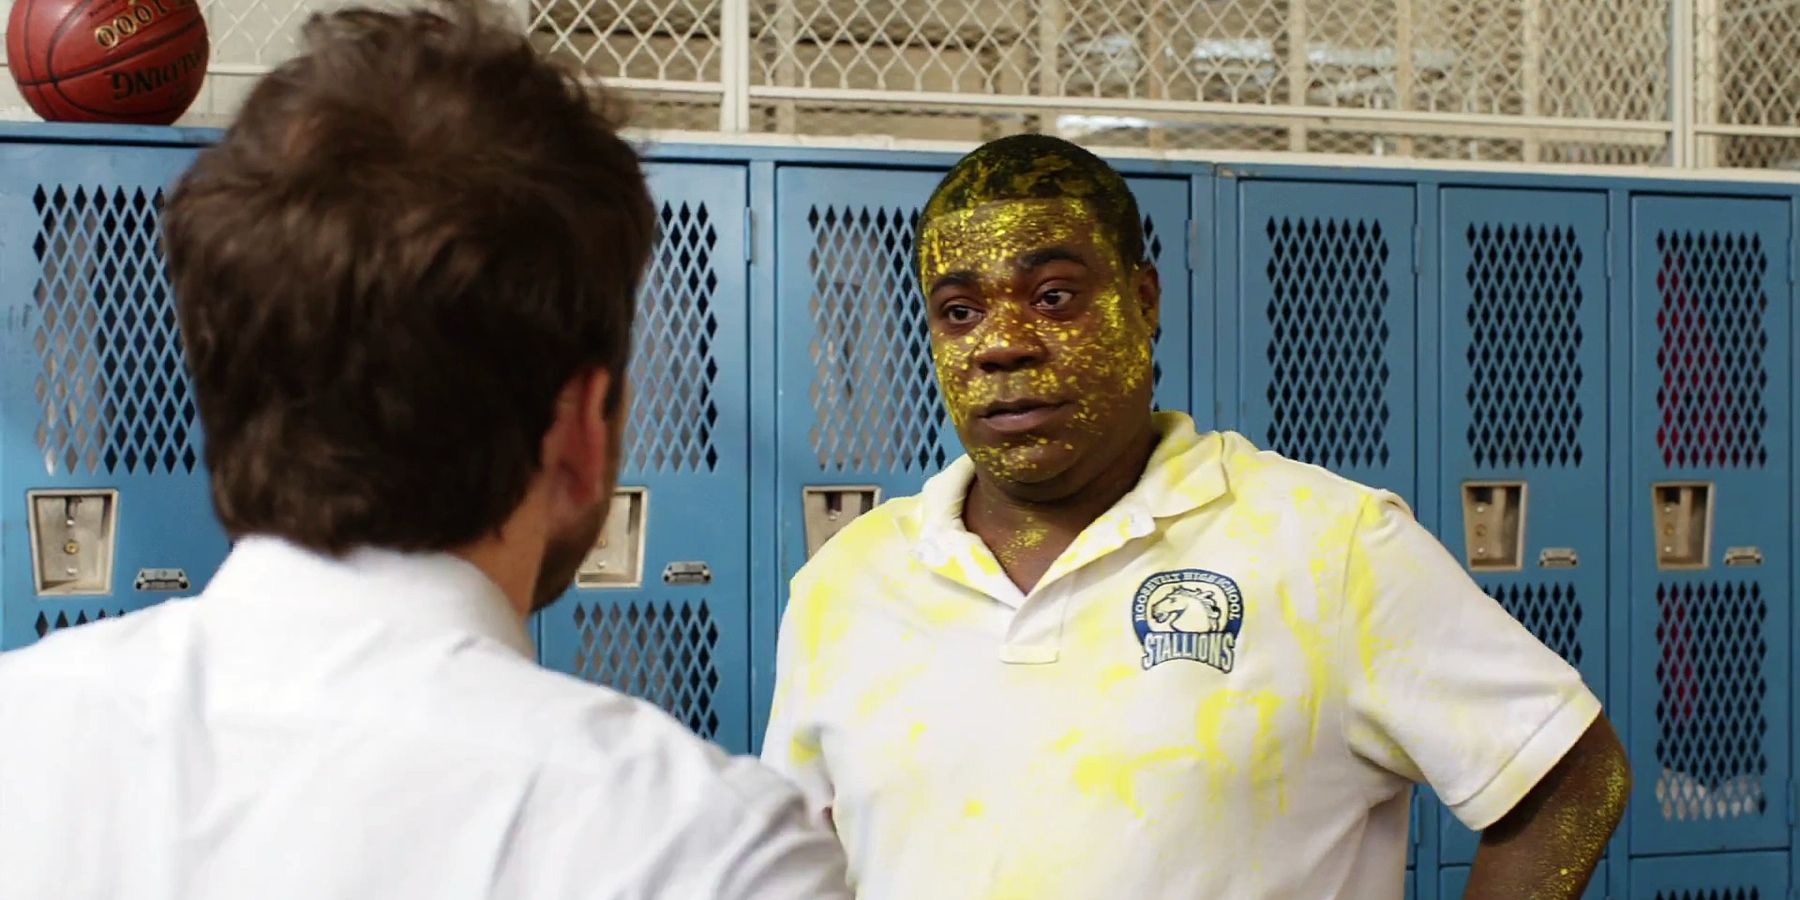 Charlie Day and Tracy Morgan covered in yellow paint talking in the locker room in Fist Fight